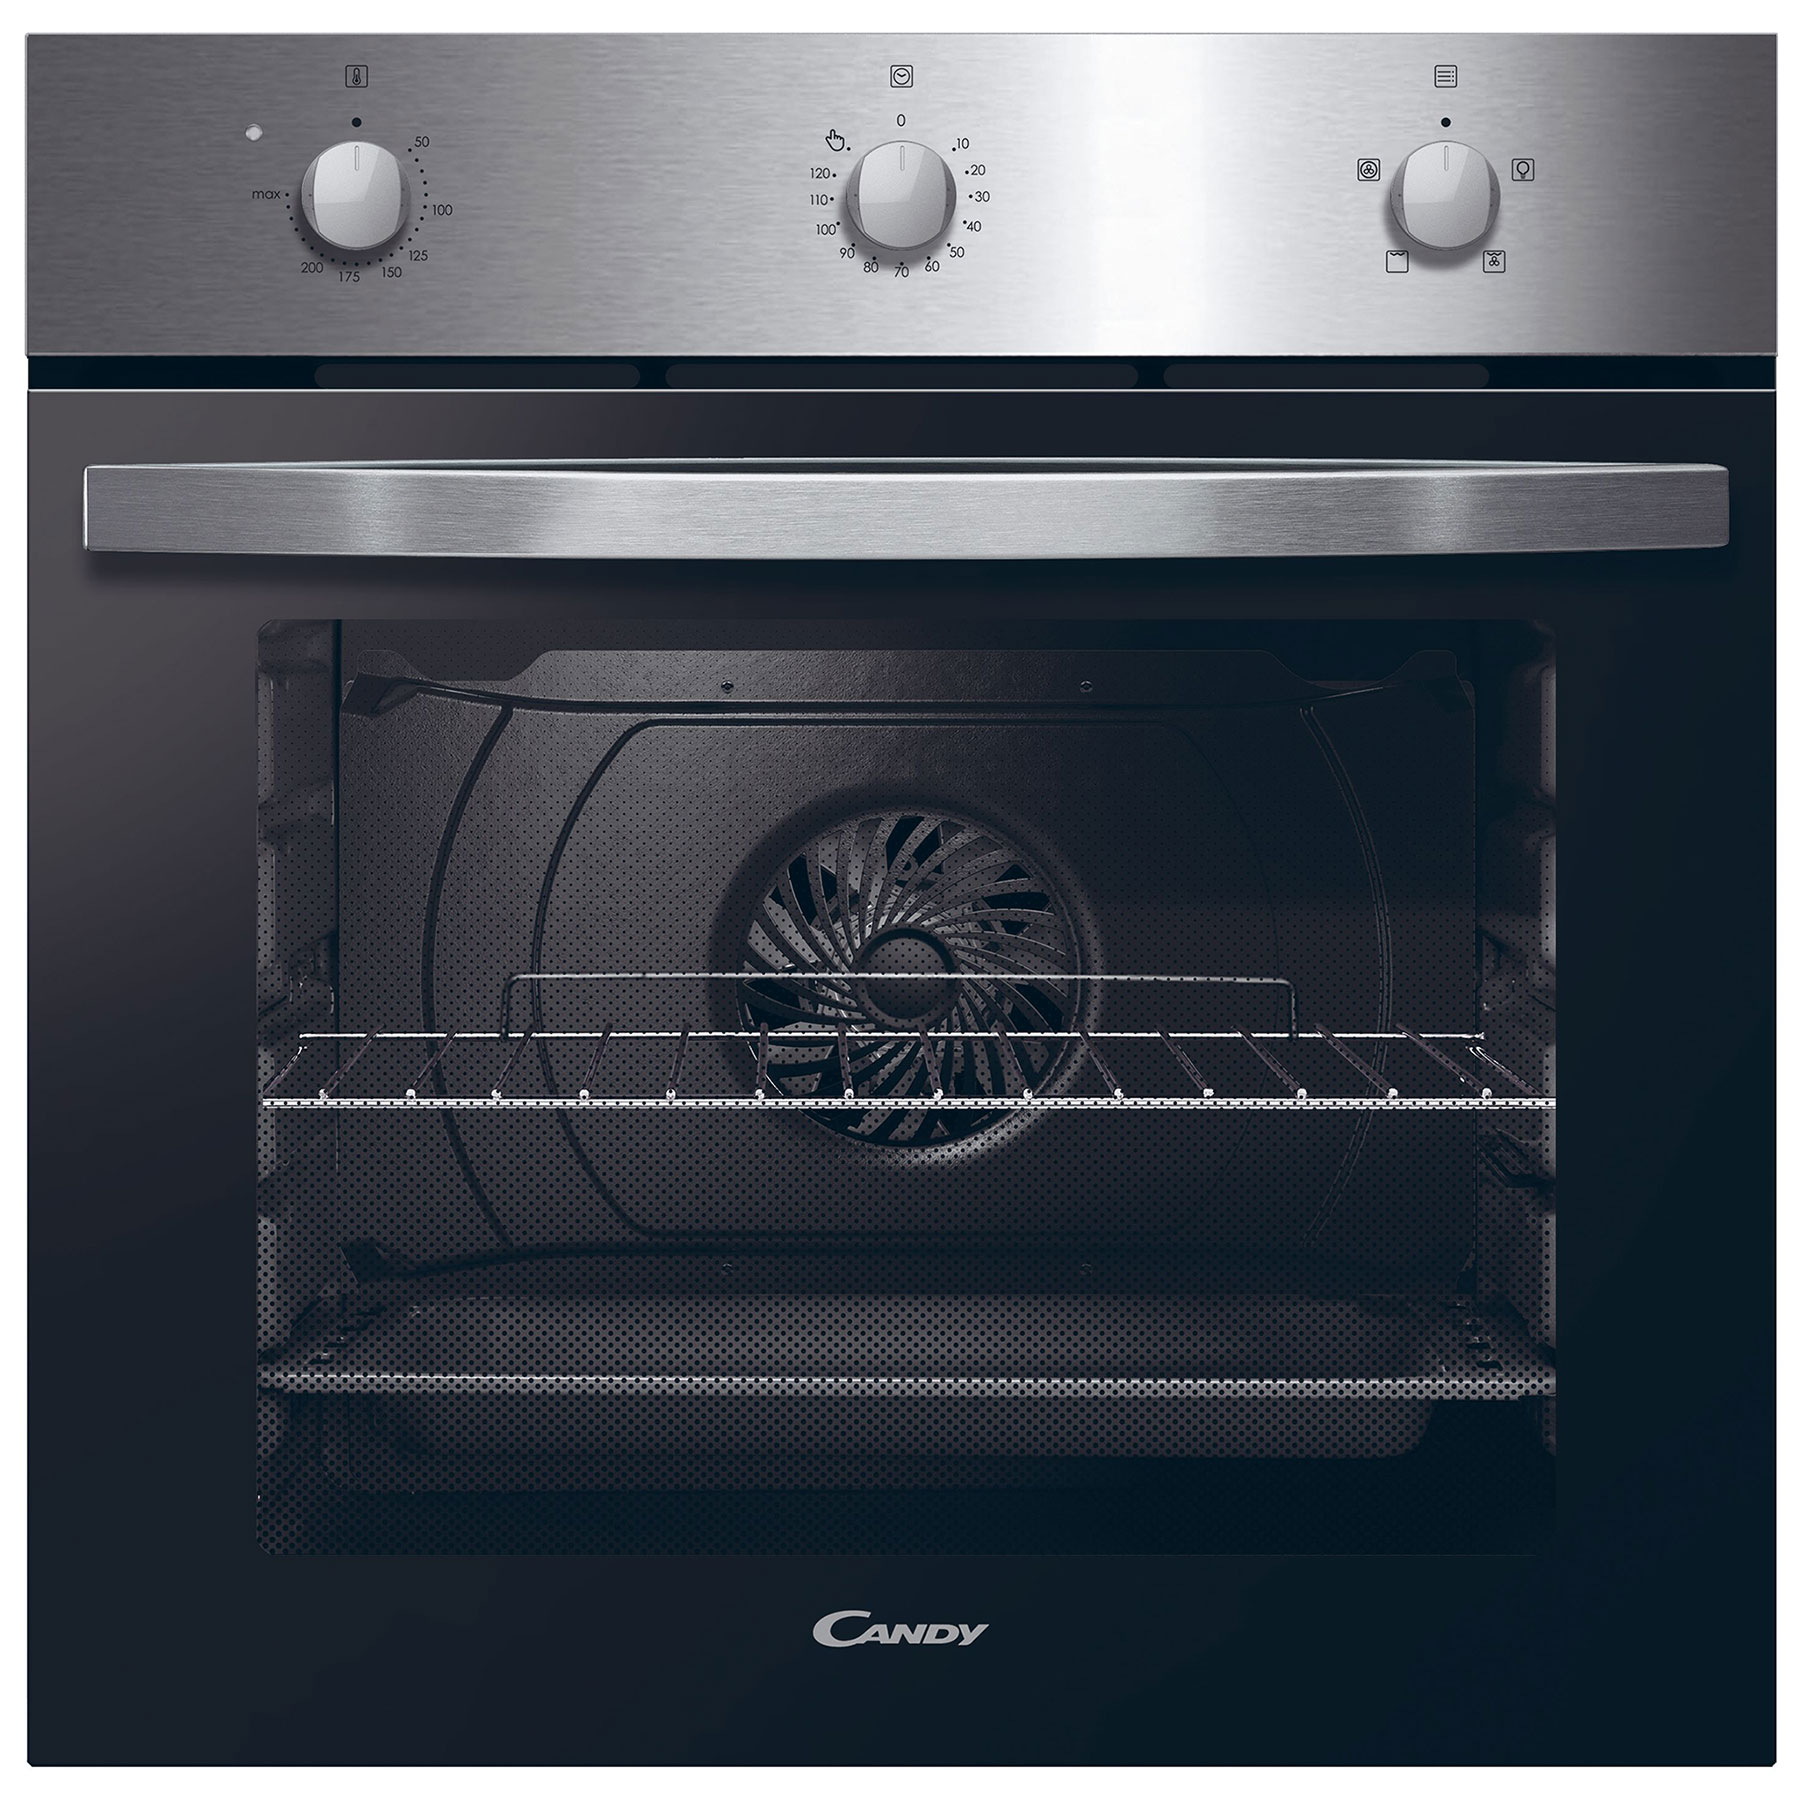 Candy FIDCX403 Built In Electric Single Oven in St Steel 65L A Rated